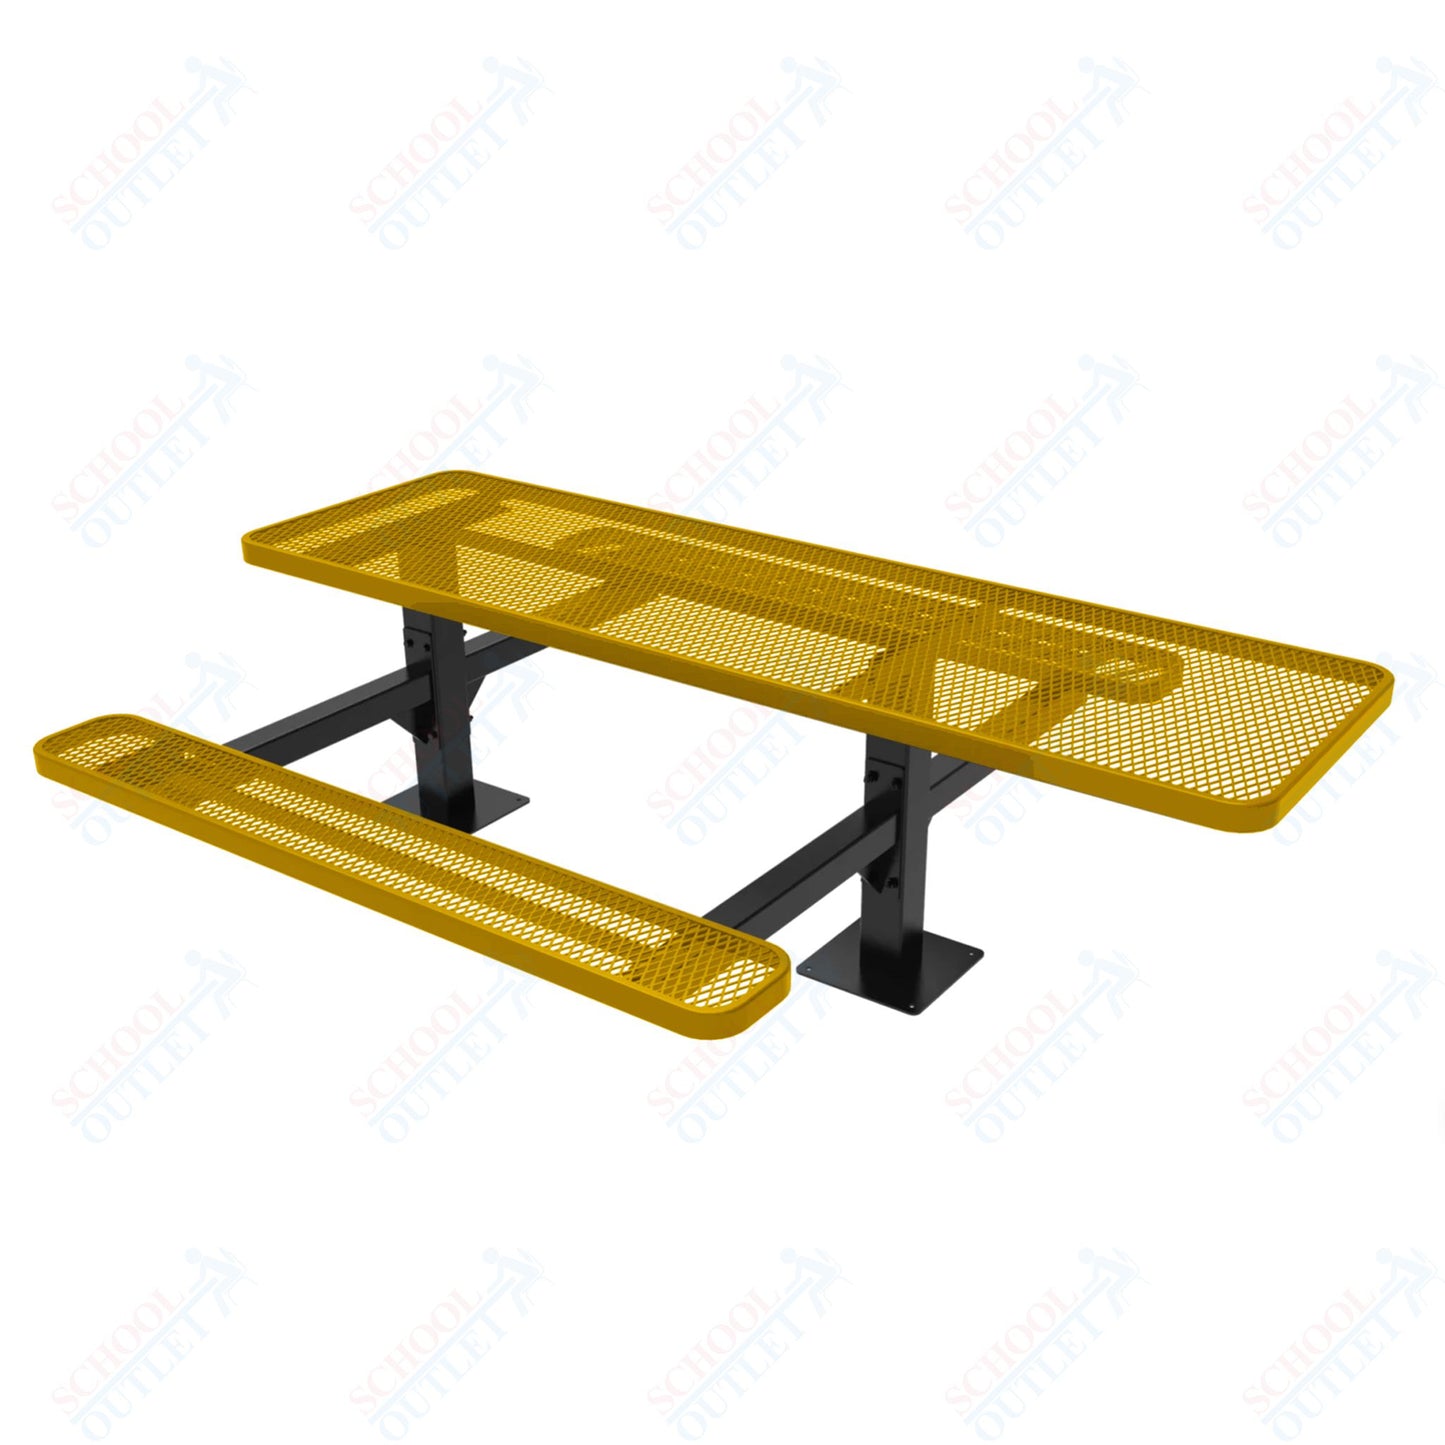 MyTcoat MYT-TRT08-09-001 8' Rectangular Double Pedestal Picnic Table with Surface Mount and ADA Accessible (96"W x 75.5"D x 30"H)